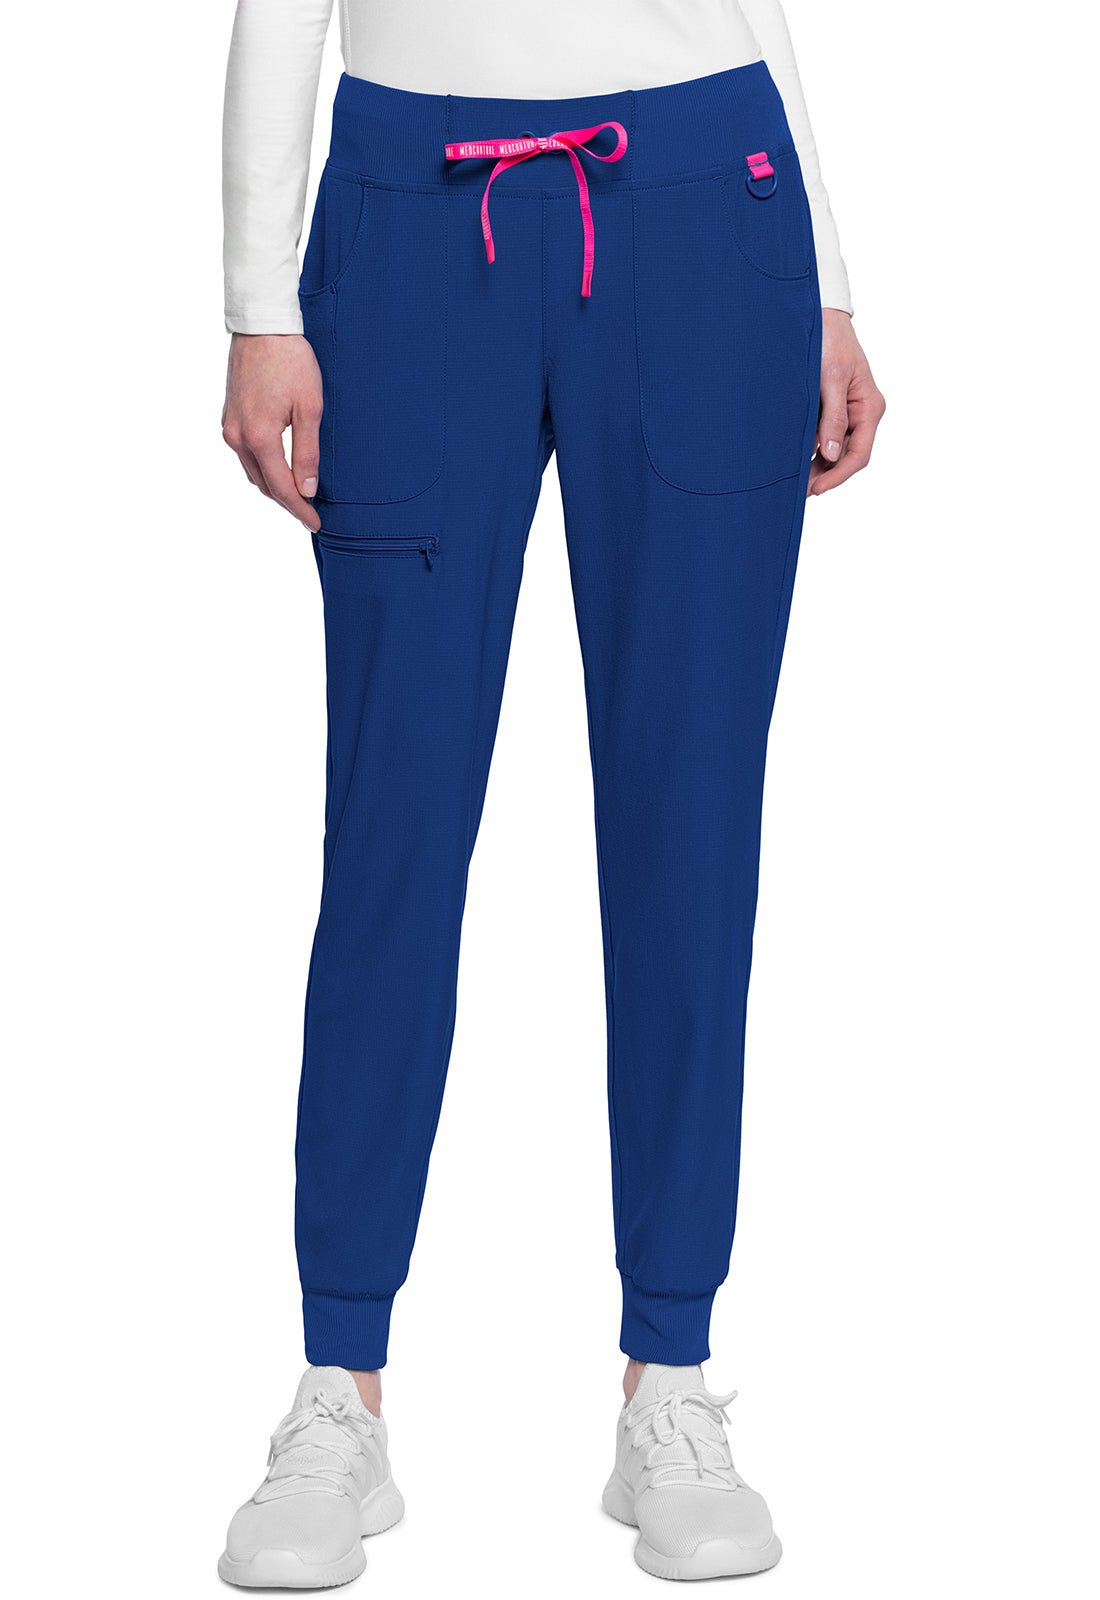 Med Couture AMP Jogger Scrub Pant MC102 in Black, Navy, Pewter, Royal - Scrubs Select